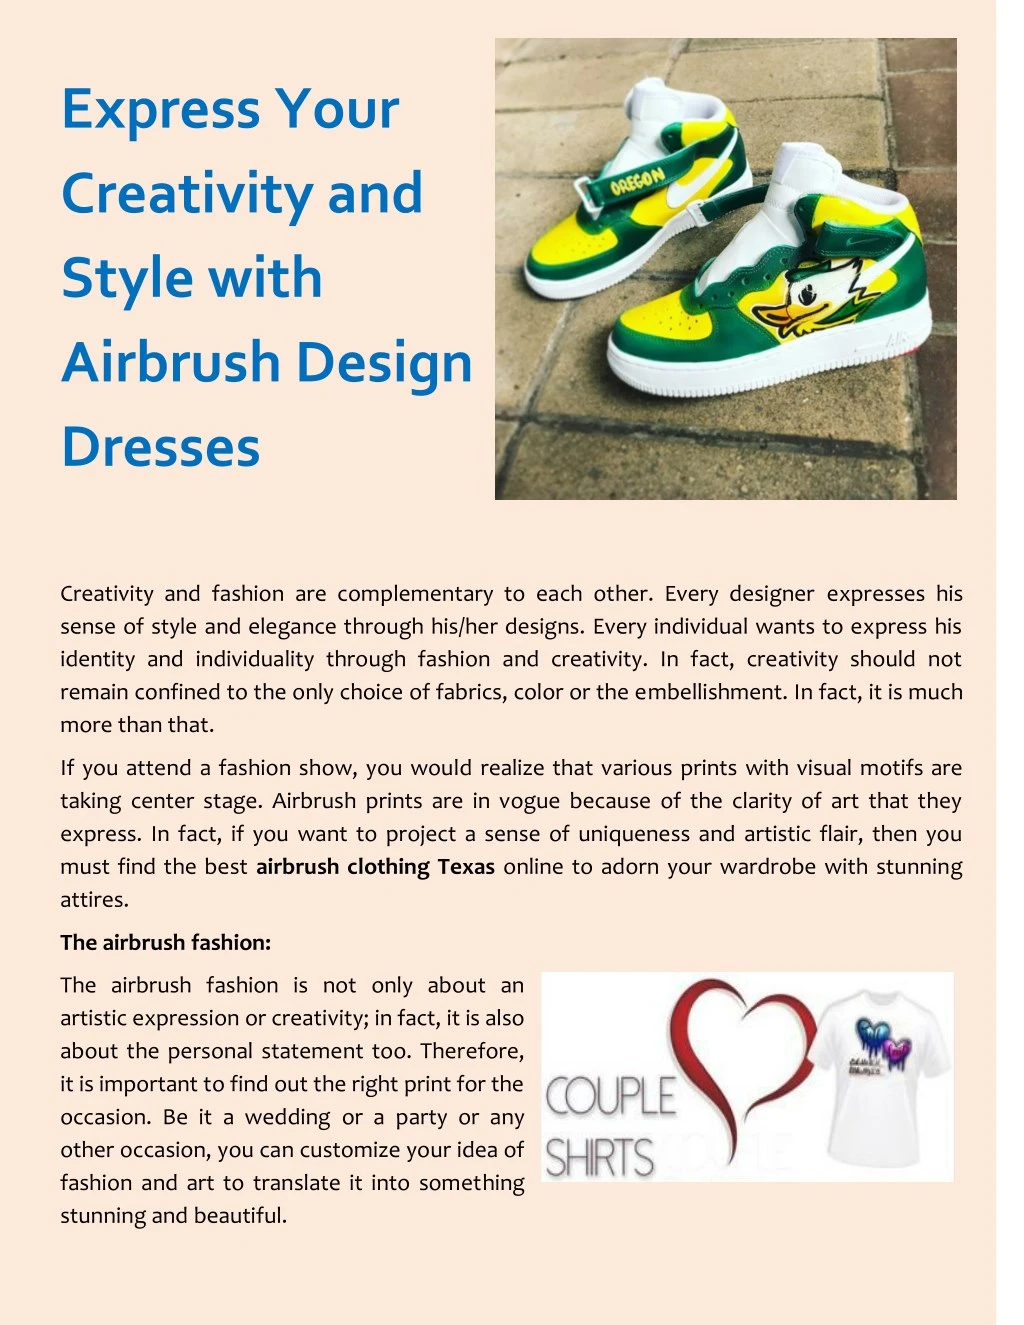 express your creativity and style with airbrush